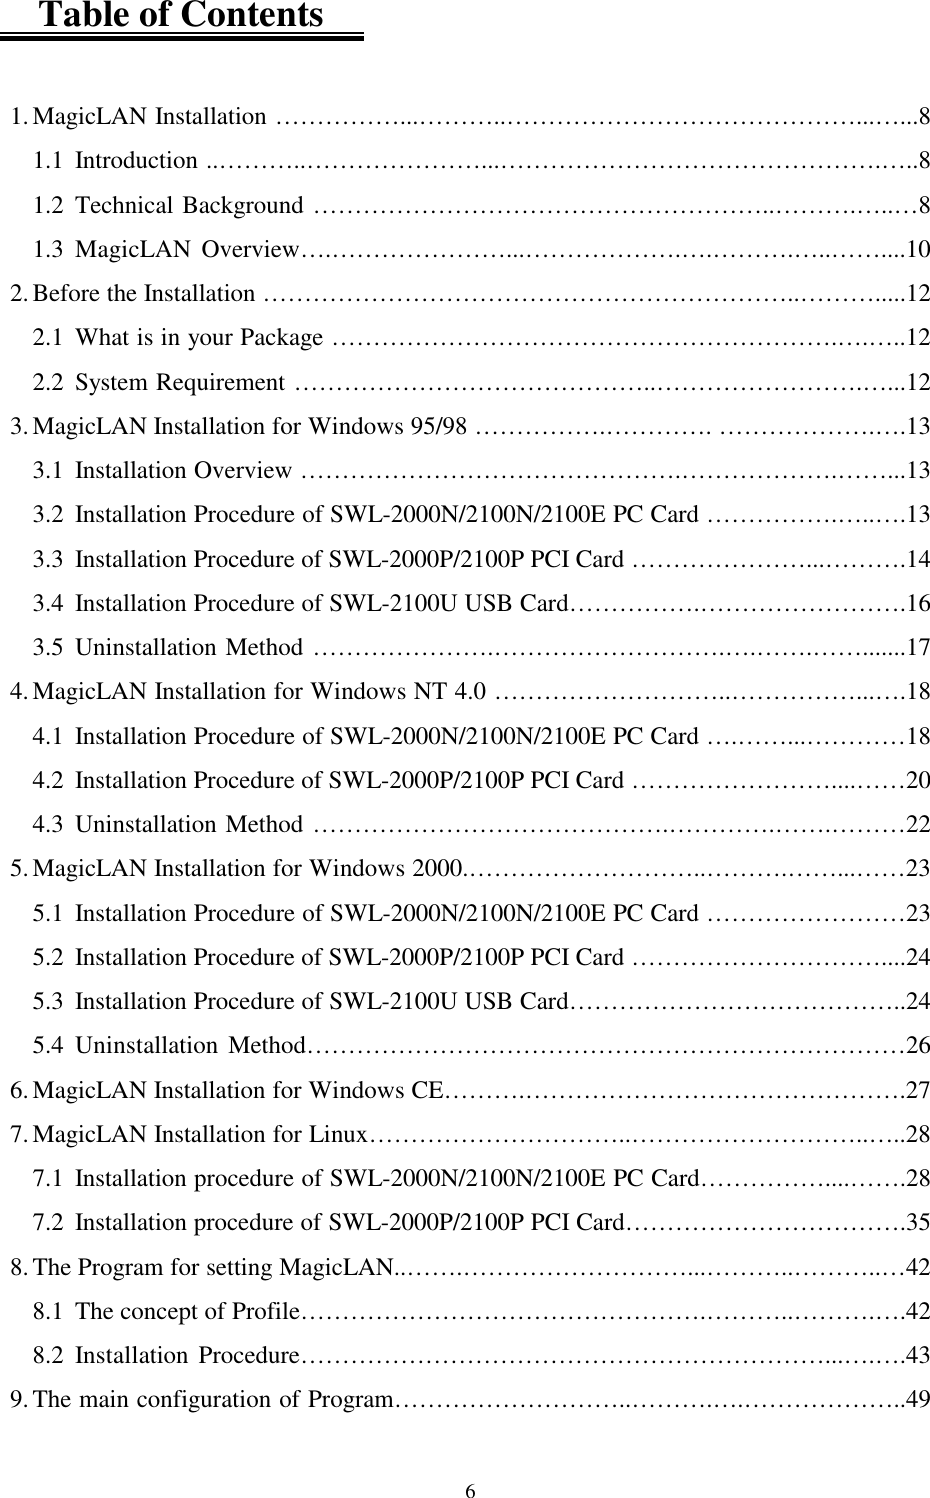  6    Table of Contents  1. MagicLAN Installation ……………...………..……………………………………...…...8 1.1 Introduction ..………..…………………...……………………………………….…..8 1.2 Technical Background ………………………………………………..……….…..…8 1.3 MagicLAN Overview….…………………...……………….….……….…..……....10 2. Before the Installation ………………………………………………………..……….....12 2.1 What is in your Package …………………………………………………….….…..12 2.2 System Requirement ……………………………………..…………………….…...12 3. MagicLAN Installation for Windows 95/98 …………….…………. ……………….….13 3.1  Installation Overview ……………………………………….……………….……...13 3.2  Installation Procedure of SWL-2000N/2100N/2100E PC Card …………….…..….13 3.3  Installation Procedure of SWL-2000P/2100P PCI Card …………………...……….14 3.4  Installation Procedure of SWL-2100U USB Card…………….…………………….16 3.5 Uninstallation Method ………………….……………………….….…….…….......17 4. MagicLAN Installation for Windows NT 4.0 ………………………..……………...….18 4.1  Installation Procedure of SWL-2000N/2100N/2100E PC Card ….……...…………18 4.2  Installation Procedure of SWL-2000P/2100P PCI Card ……………………....……20 4.3 Uninstallation Method …………………………………….………….…….………22 5. MagicLAN Installation for Windows 2000.………………………..……….……...……23 5.1  Installation Procedure of SWL-2000N/2100N/2100E PC Card ……………………23 5.2  Installation Procedure of SWL-2000P/2100P PCI Card …………………………....24 5.3  Installation Procedure of SWL-2100U USB Card…………………………………..24 5.4 Uninstallation Method………………………………………………………………26 6. MagicLAN Installation for Windows CE……….……………………………………….27 7. MagicLAN Installation for Linux…………………………..………………………..…..28 7.1 Installation procedure of SWL-2000N/2100N/2100E PC Card……………....…….28 7.2  Installation procedure of SWL-2000P/2100P PCI Card…………………………….35 8. The Program for setting MagicLAN..…….………………………...………..………..…42 8.1  The concept of Profile………………………………………….………..……….….42 8.2 Installation Procedure………………………………………………………...….….43 9. The main configuration of Program………………………..……….….………………..49 